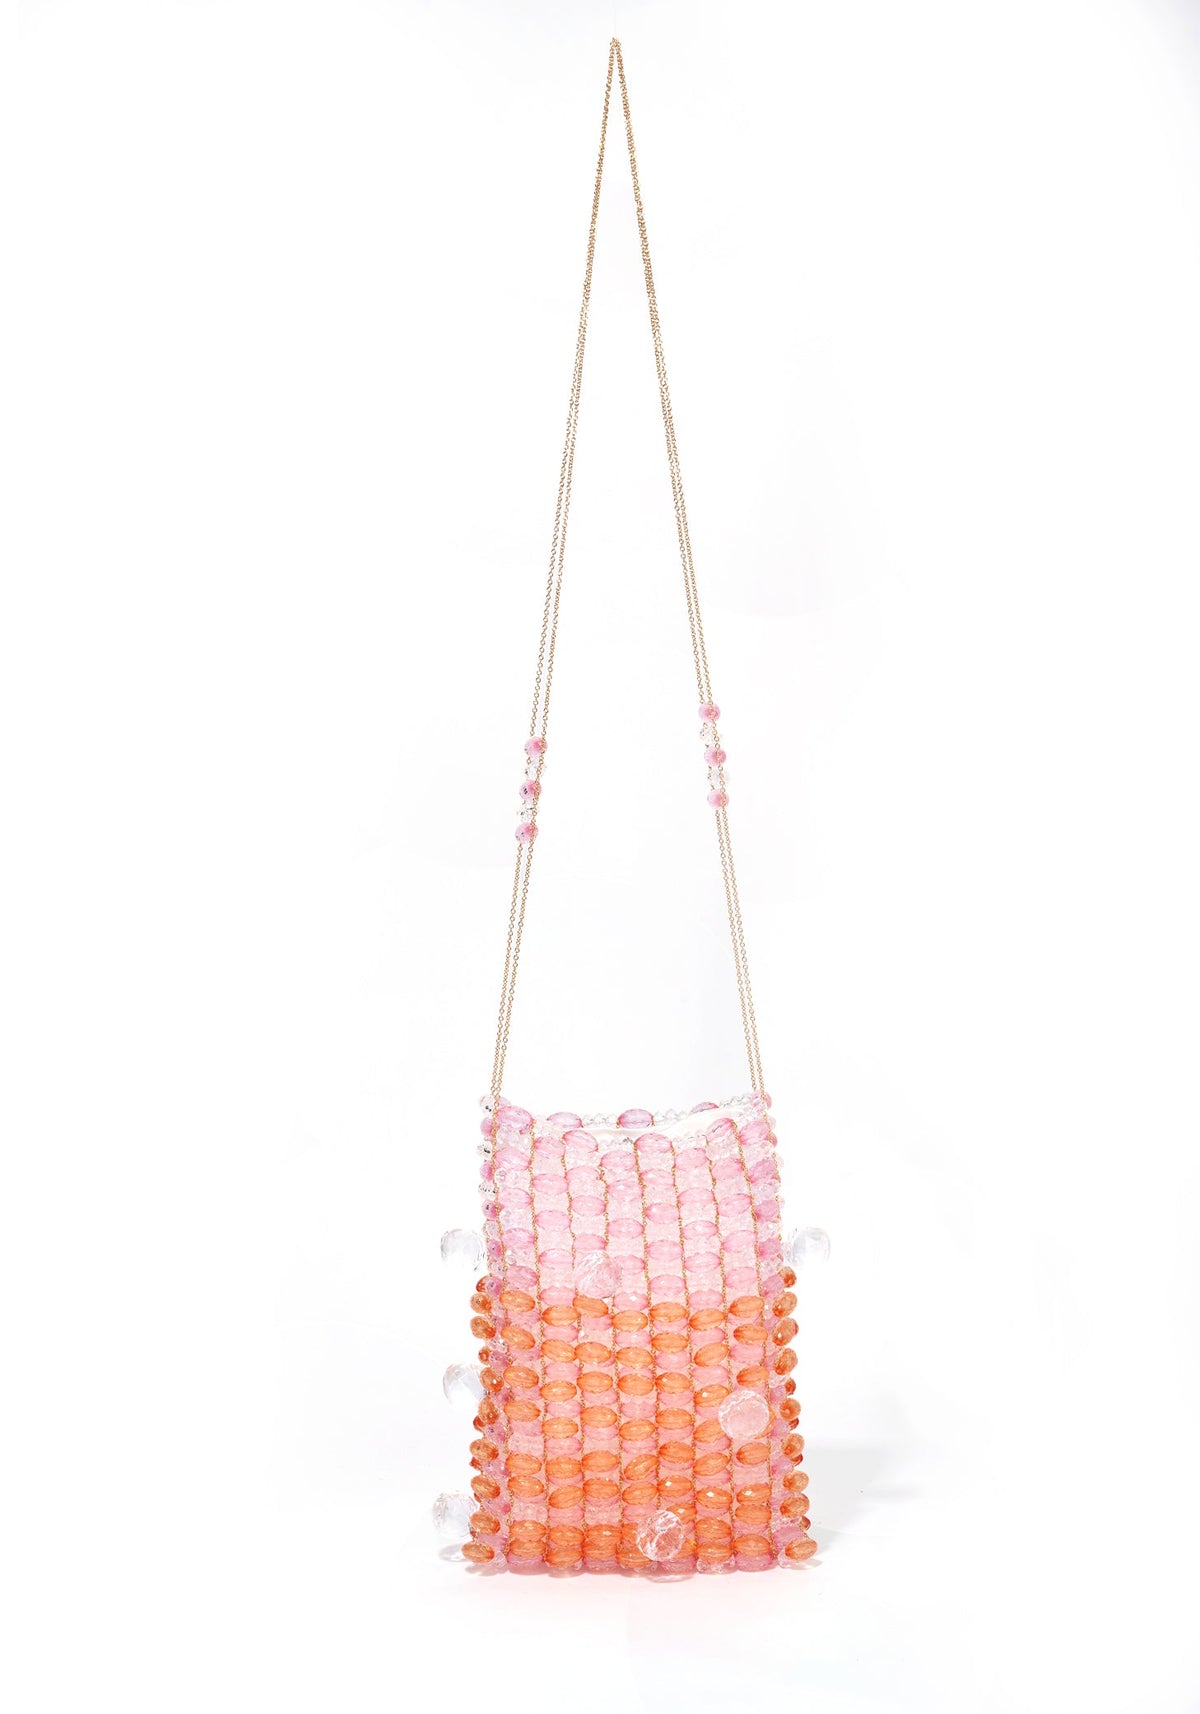 Caprice Bag in Peach and Pink Ombre